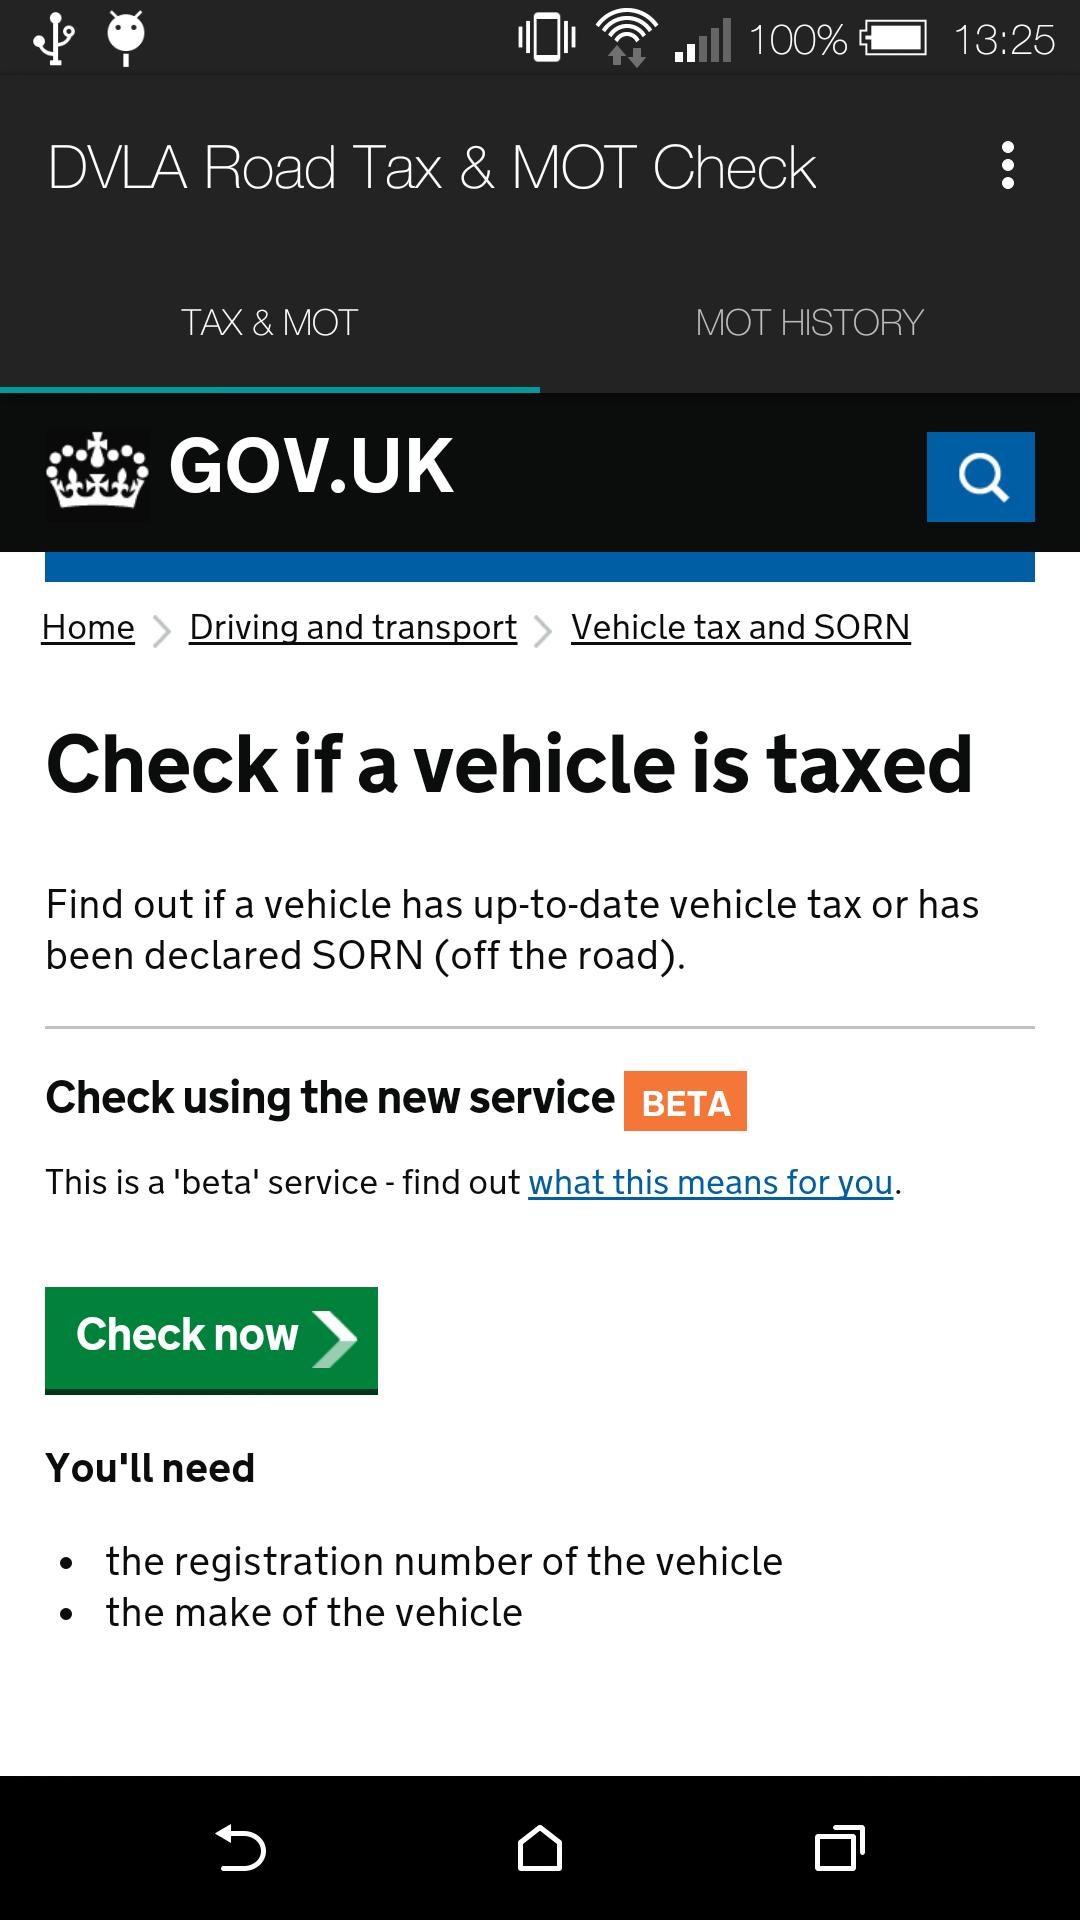 dvla-road-tax-mot-check-apk-for-android-download